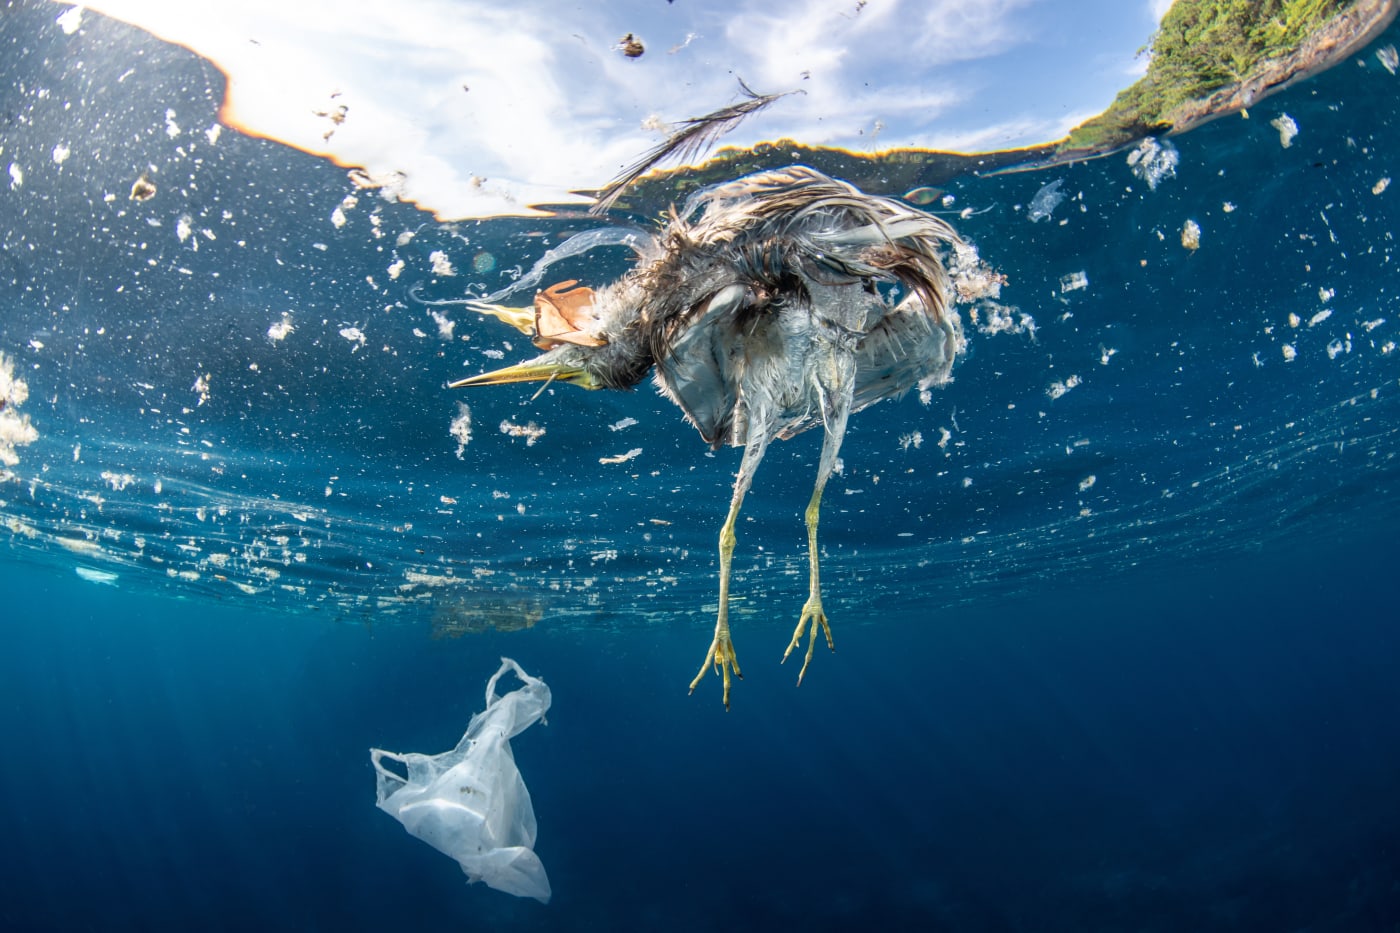 Dead bird and plastic bag floating in the ocean